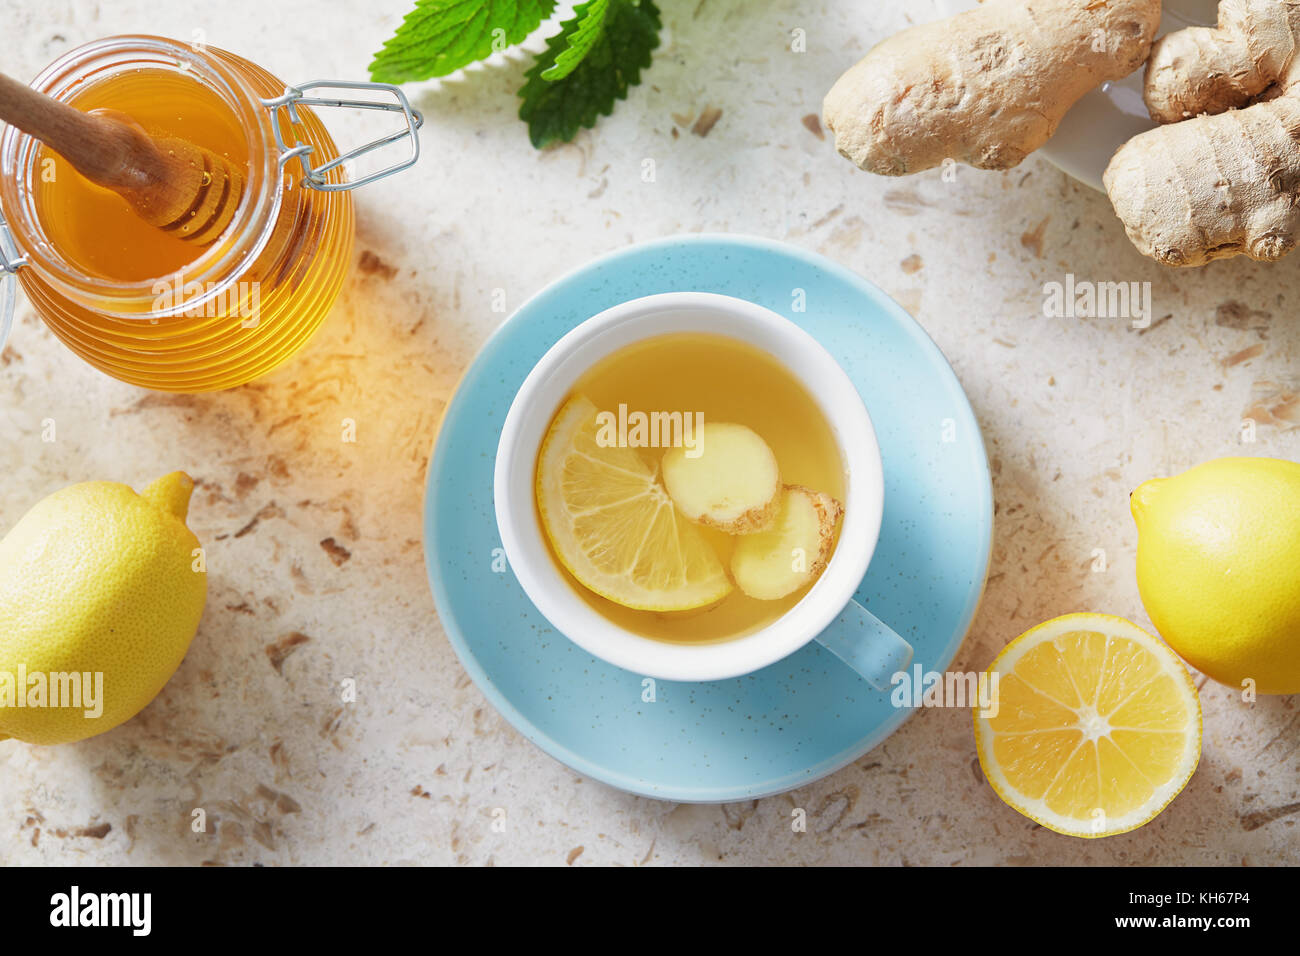 Lemon and ginger tea with honey. Cup of hot honey lemon tea with fresh ginger root. Stock Photo